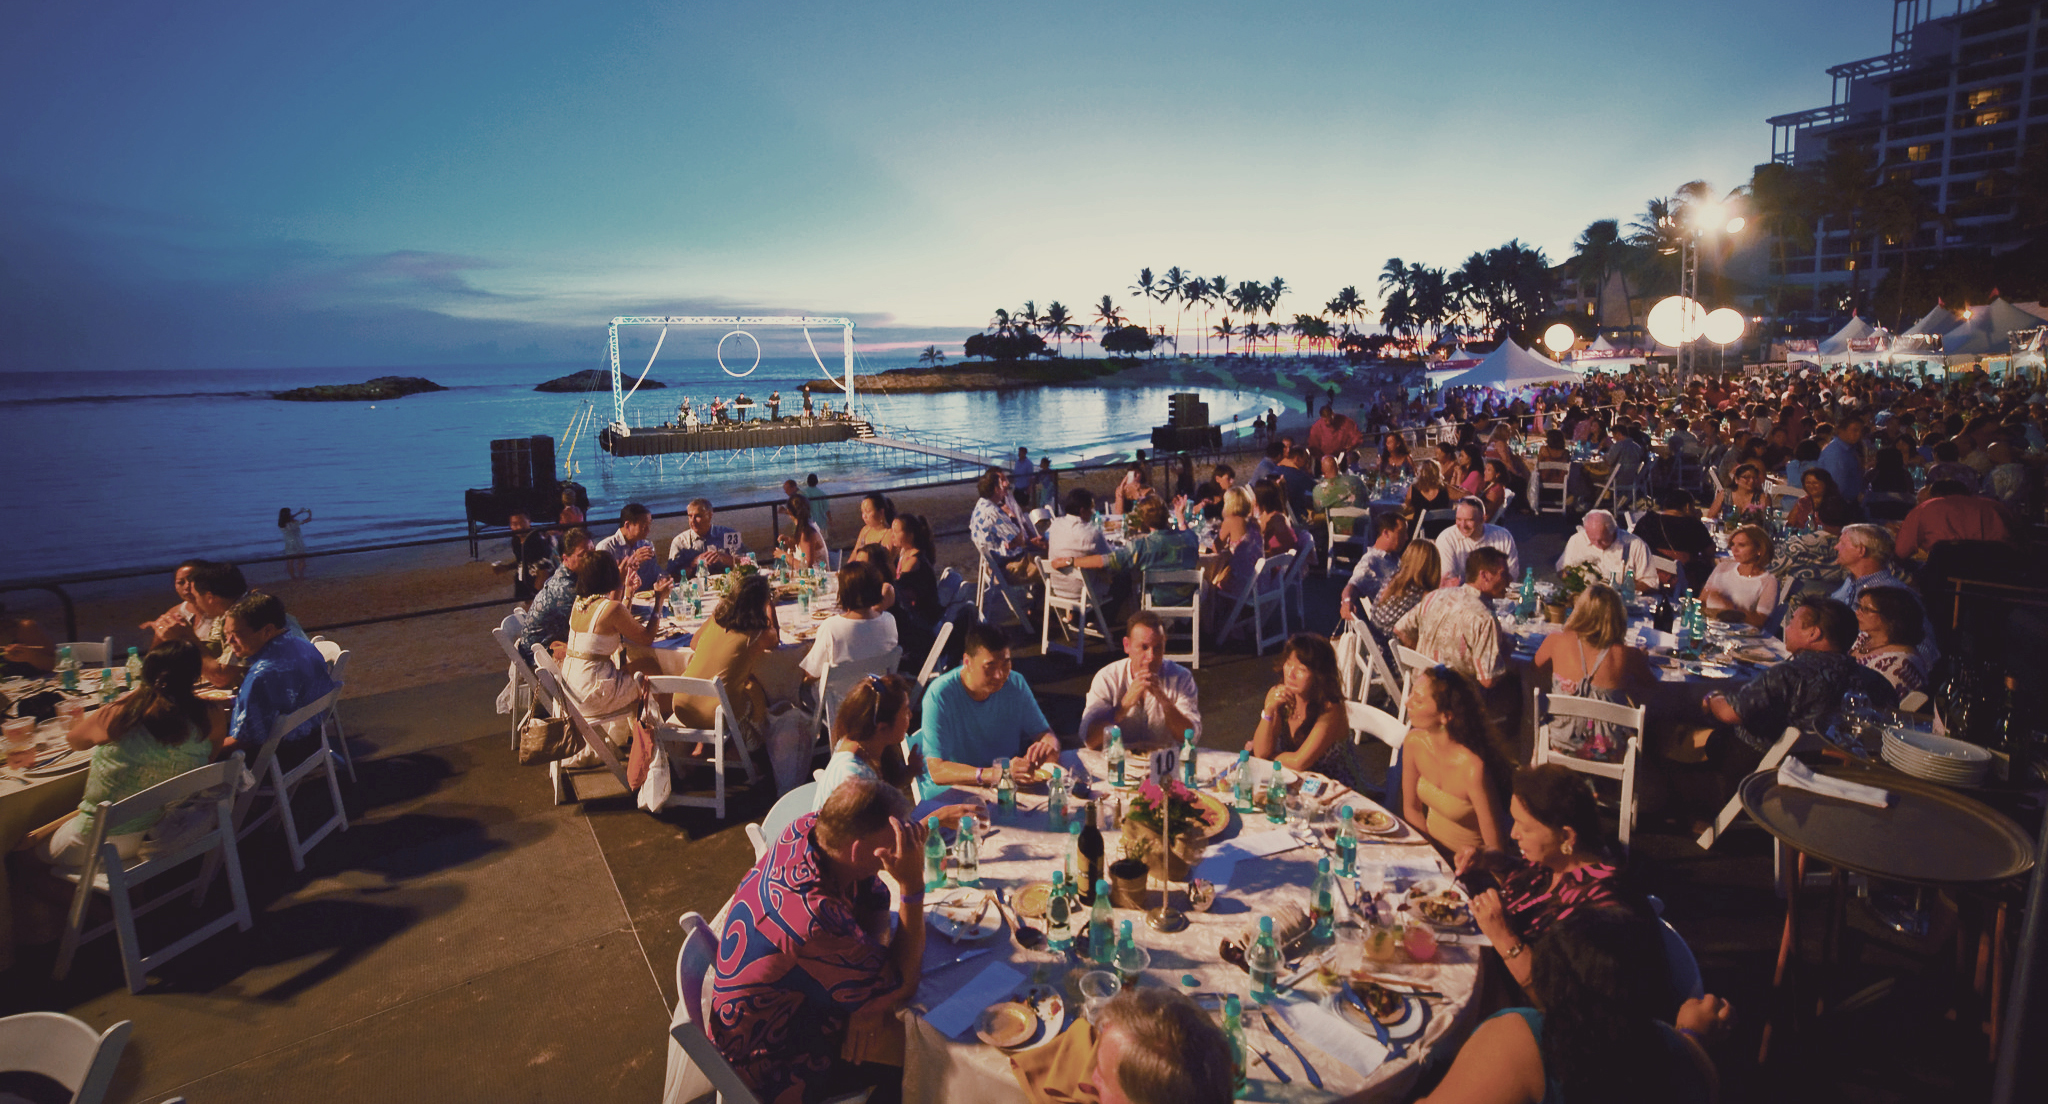 Events International, full service event management company in Hawaii